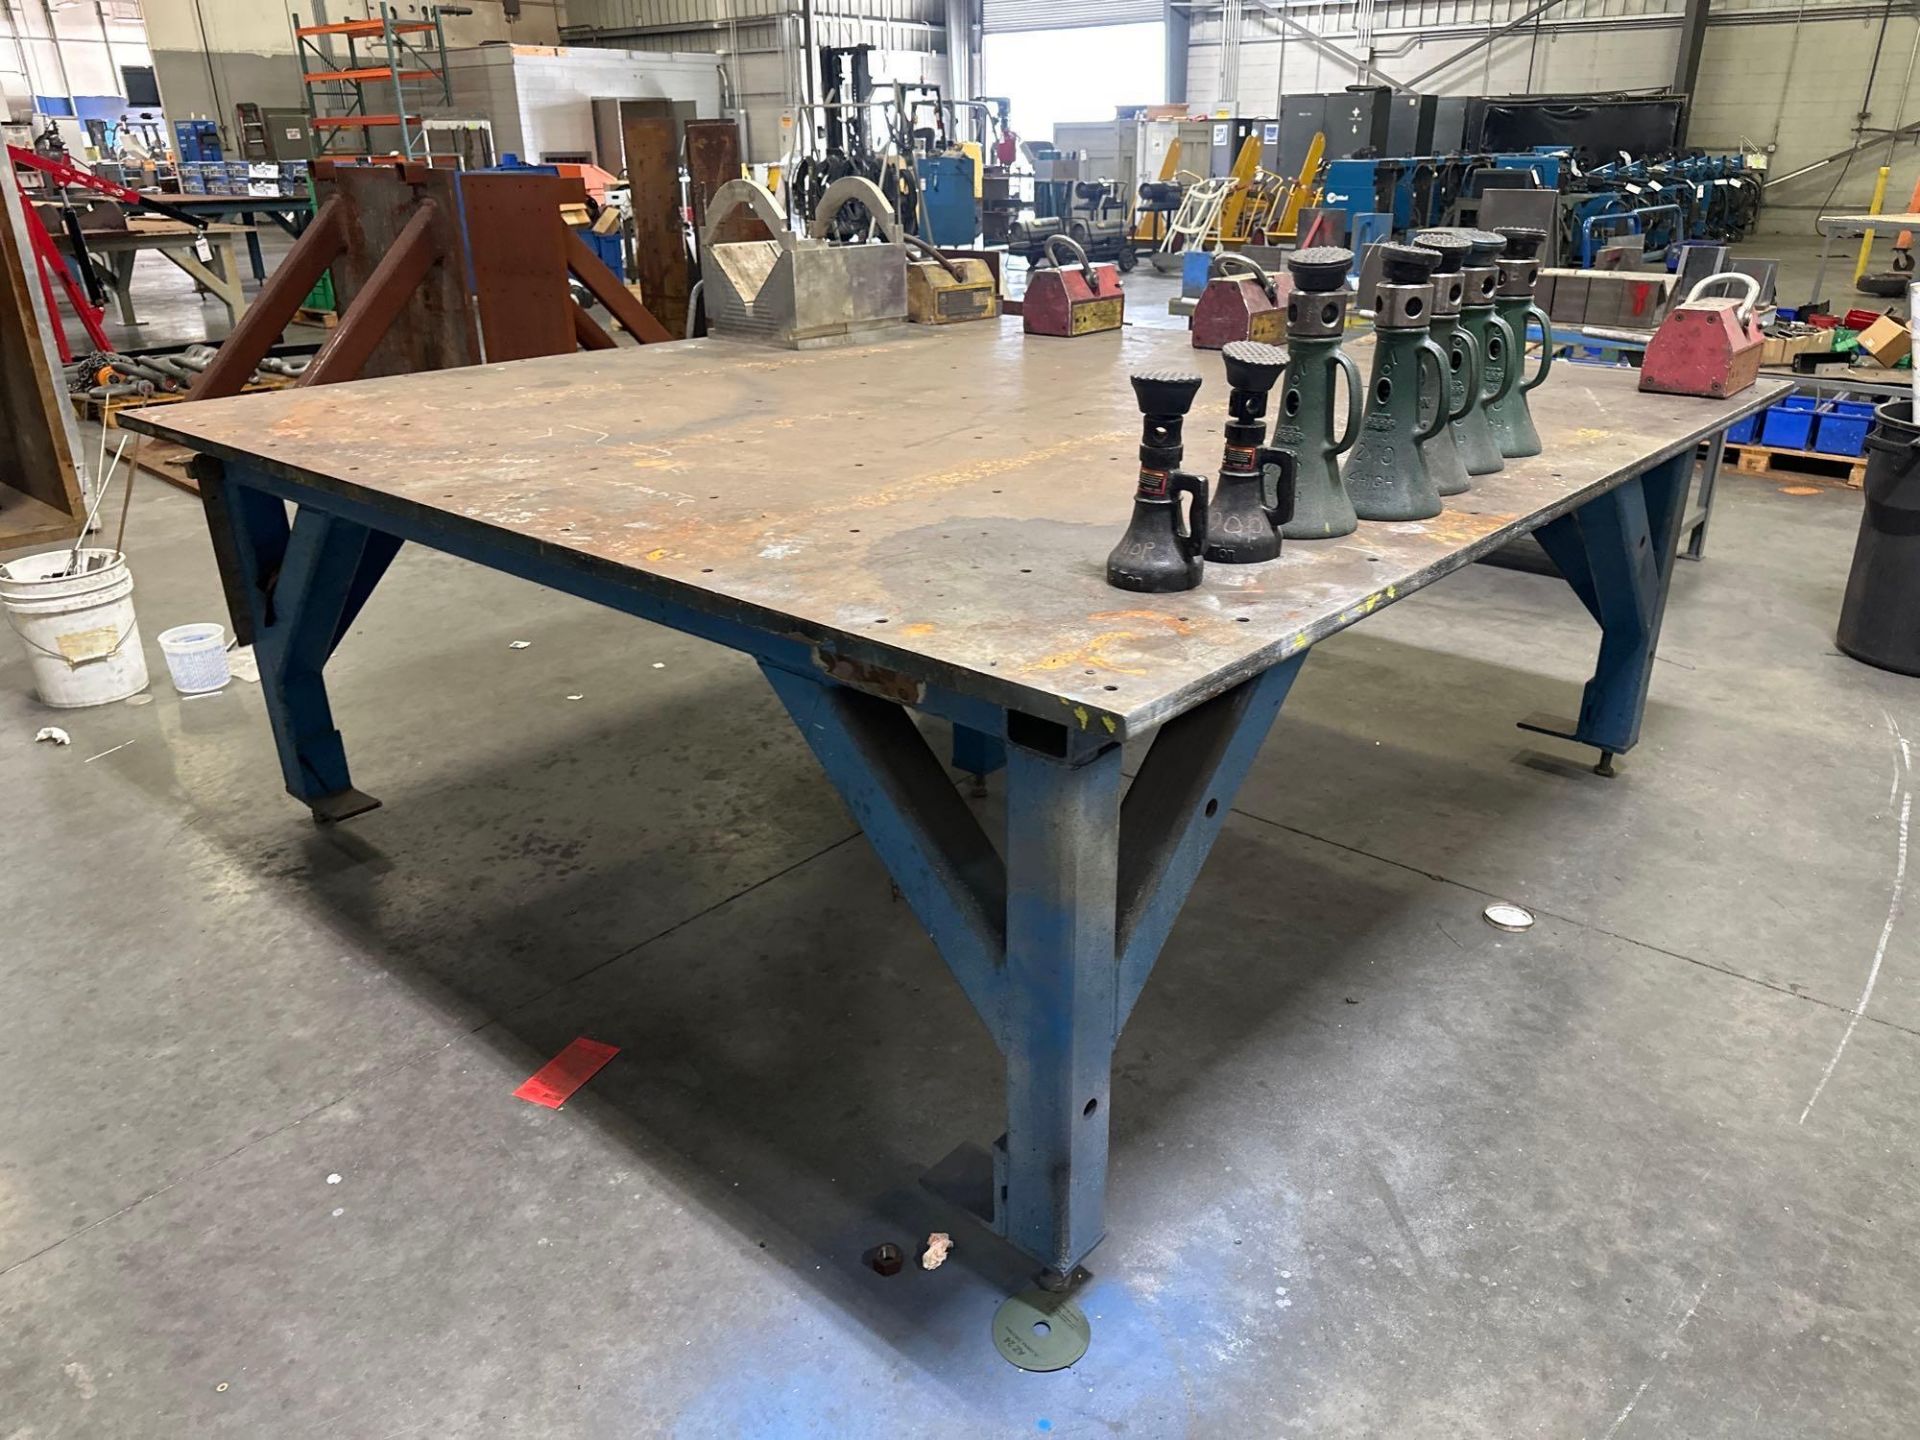 96”L x 99”W x 36”H Steel Welding Table *CONTENTS NOT INCLUDED. TABLE ONLY* - Image 4 of 4